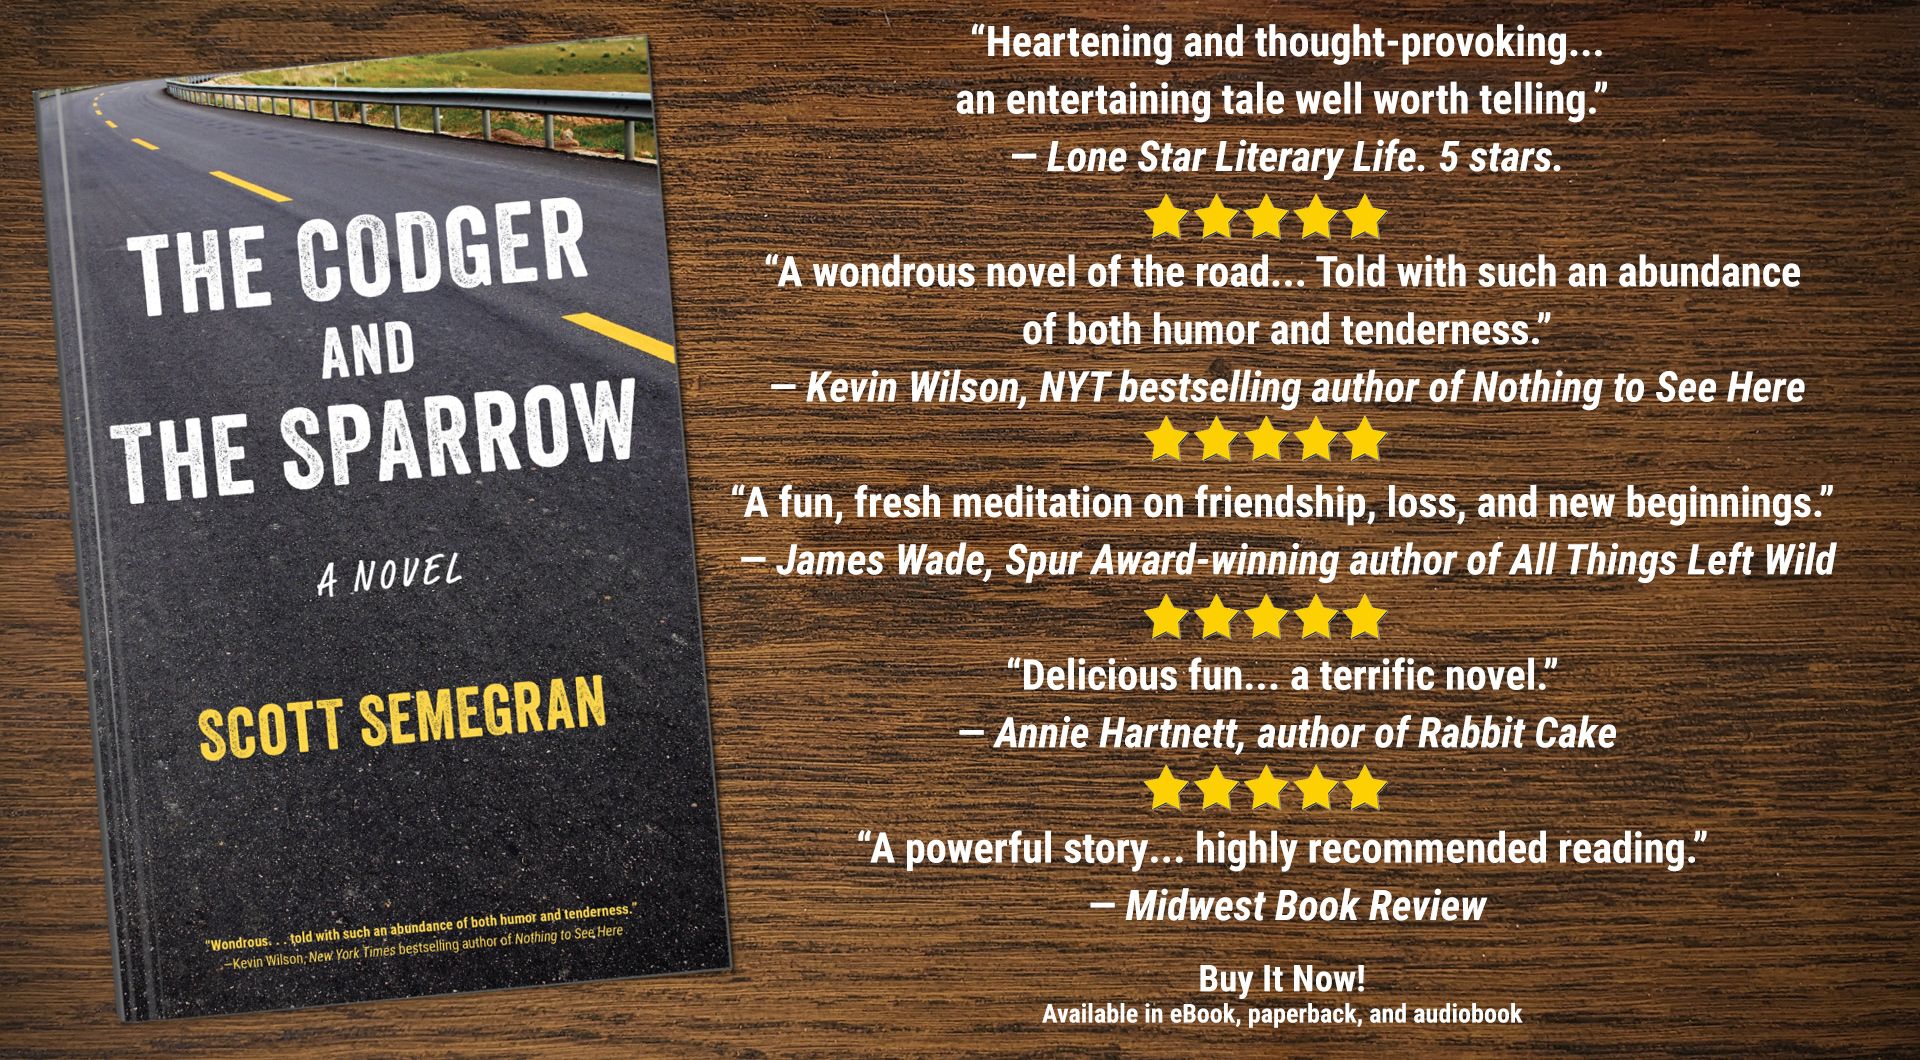 The Codger and the Sparrow home page banner with reviews